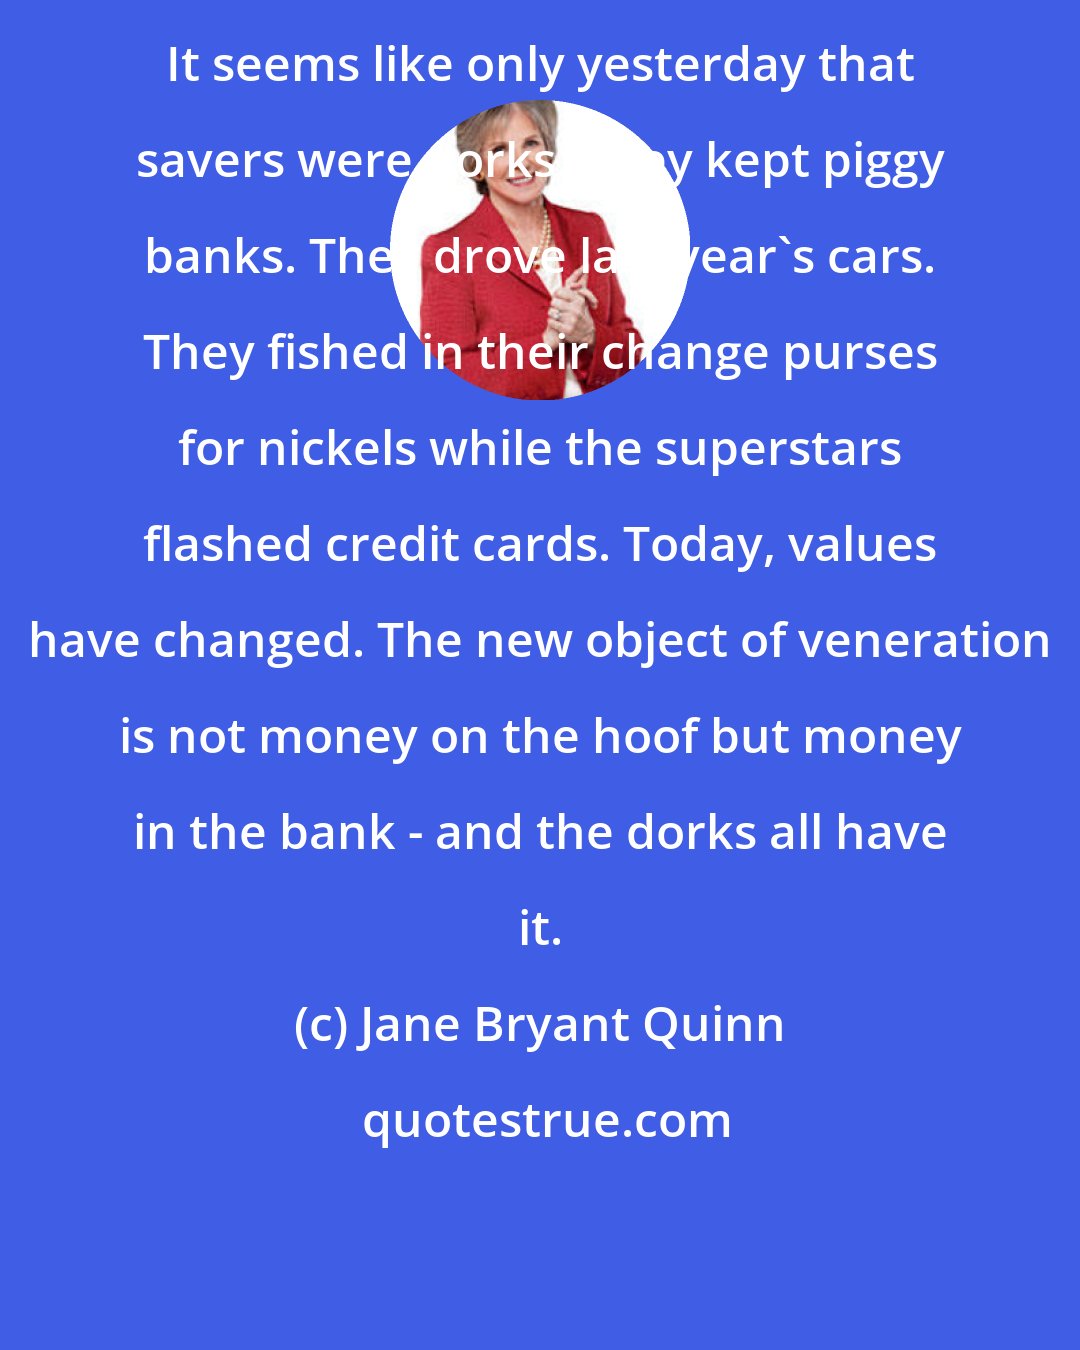 Jane Bryant Quinn: It seems like only yesterday that savers were dorks. They kept piggy banks. They drove last year's cars. They fished in their change purses for nickels while the superstars flashed credit cards. Today, values have changed. The new object of veneration is not money on the hoof but money in the bank - and the dorks all have it.